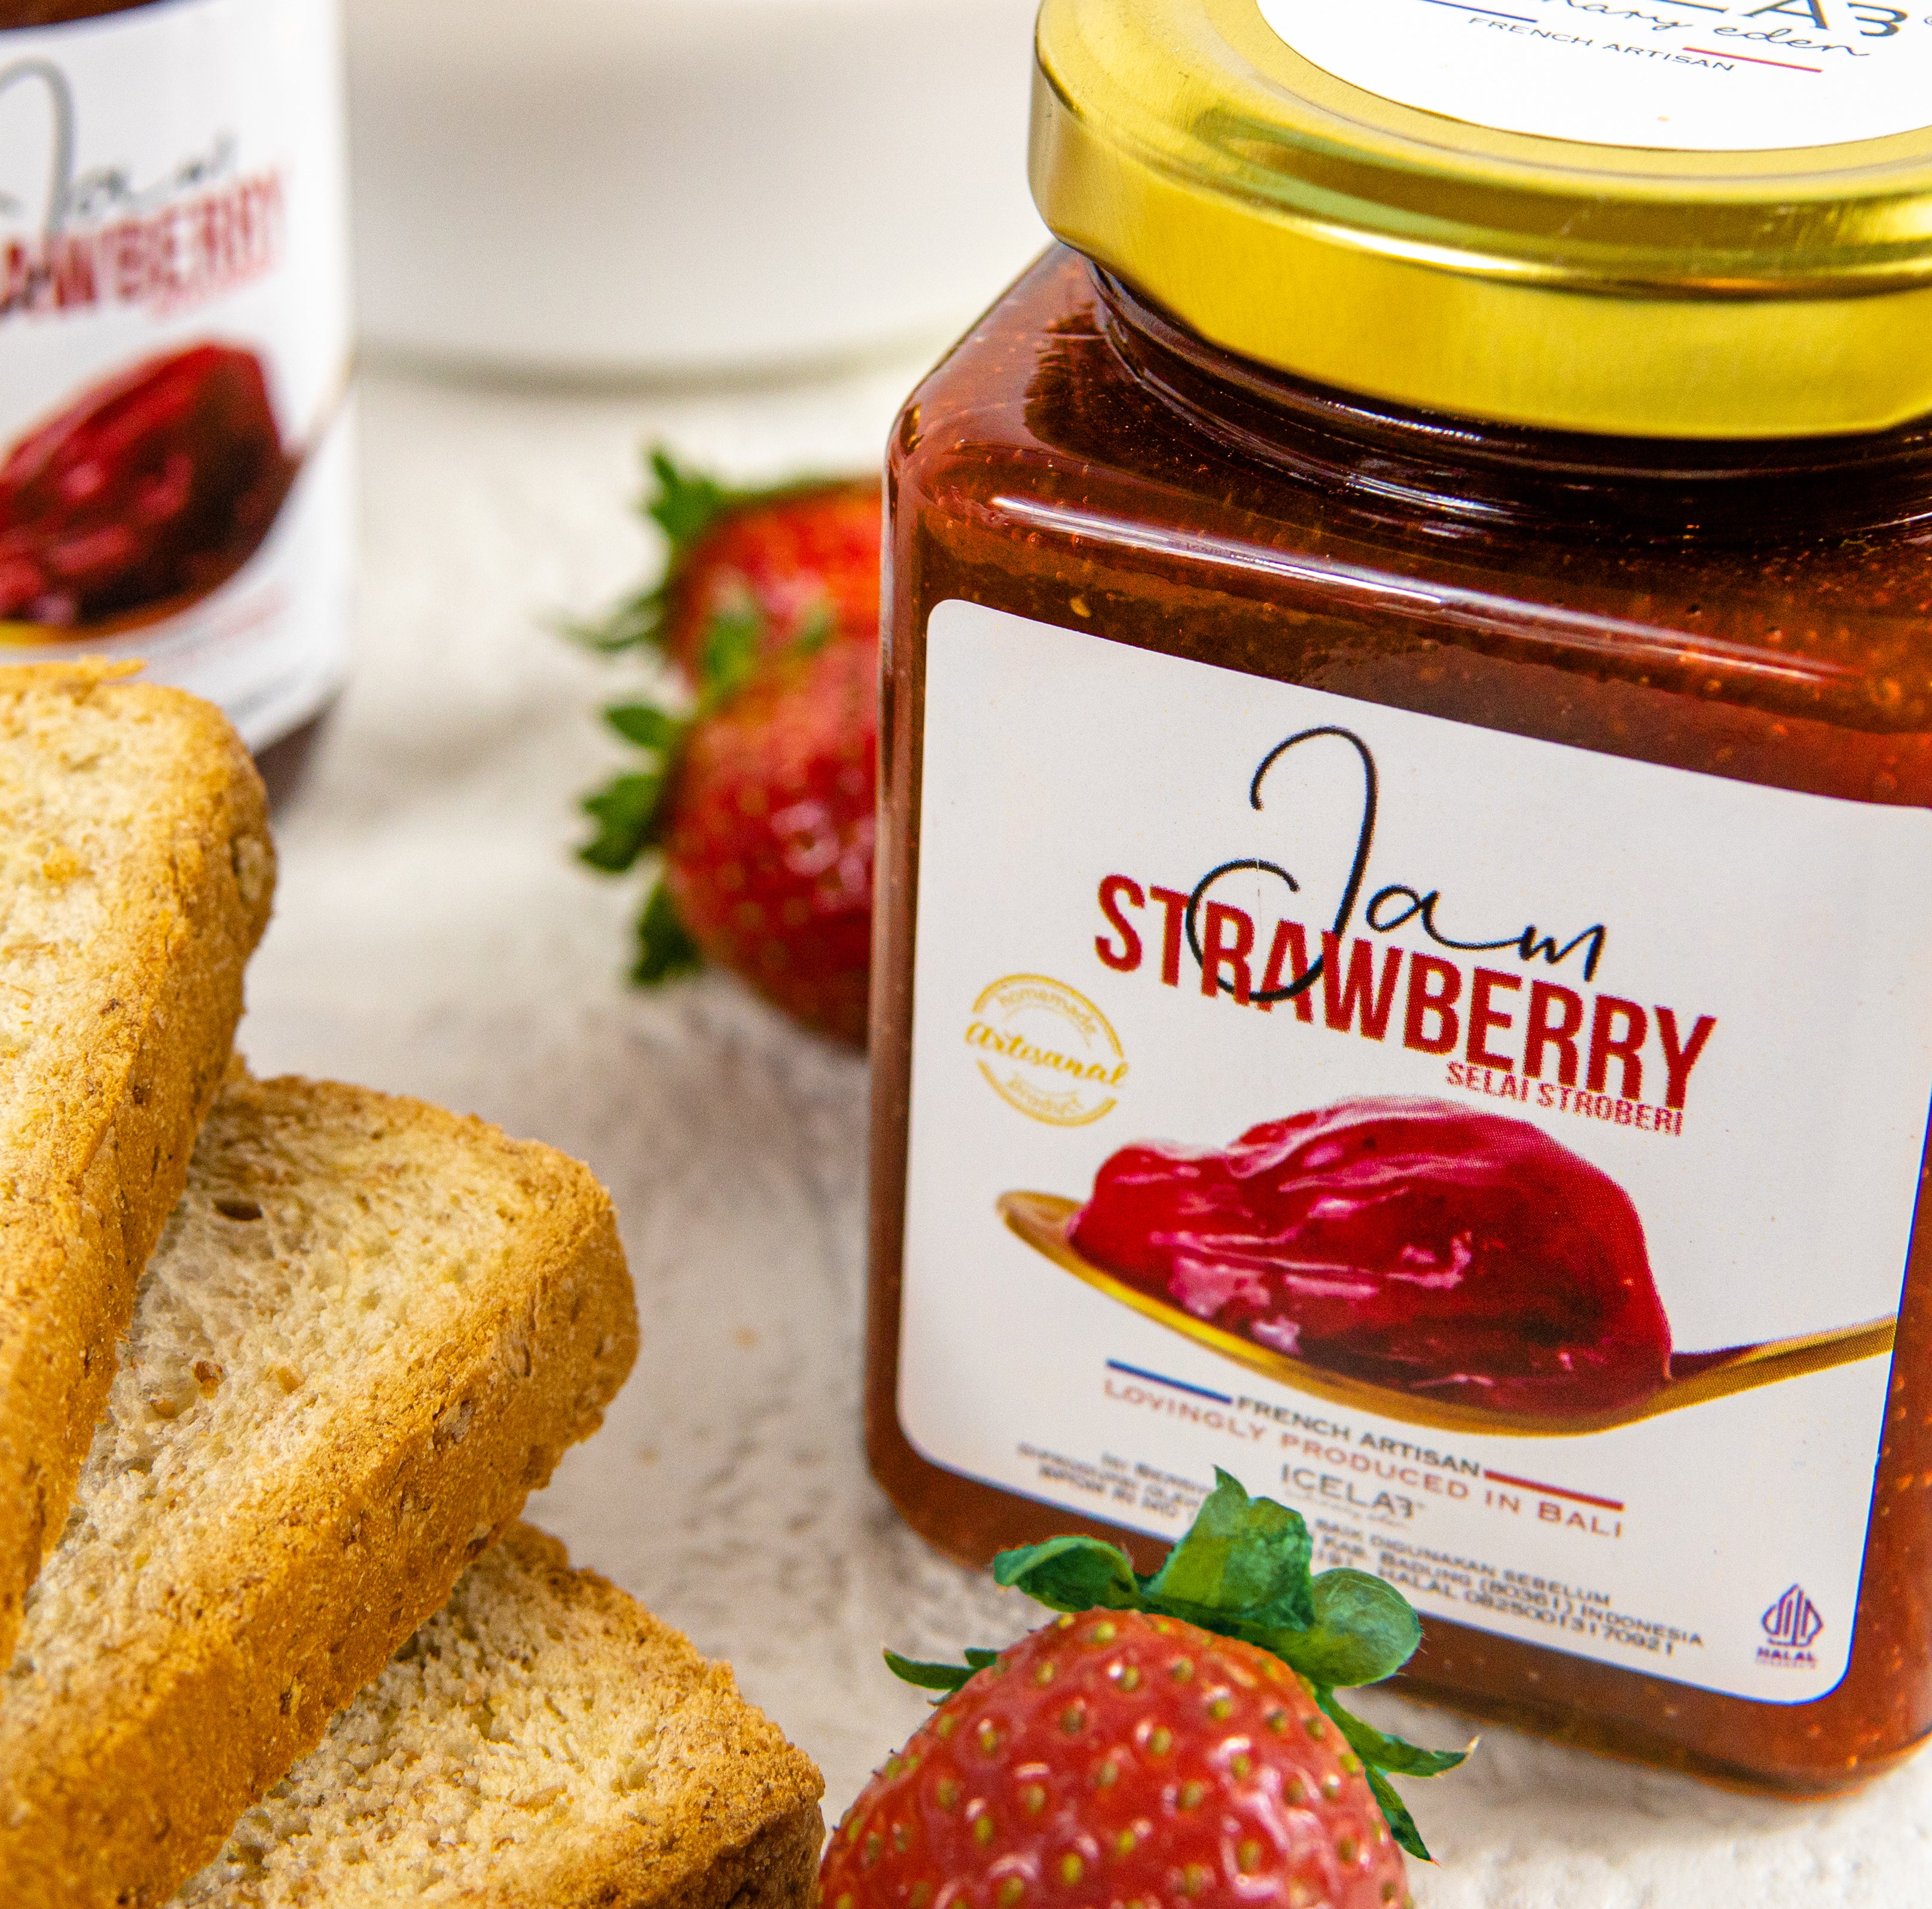 Delicious Strawberry Jam from Icelab